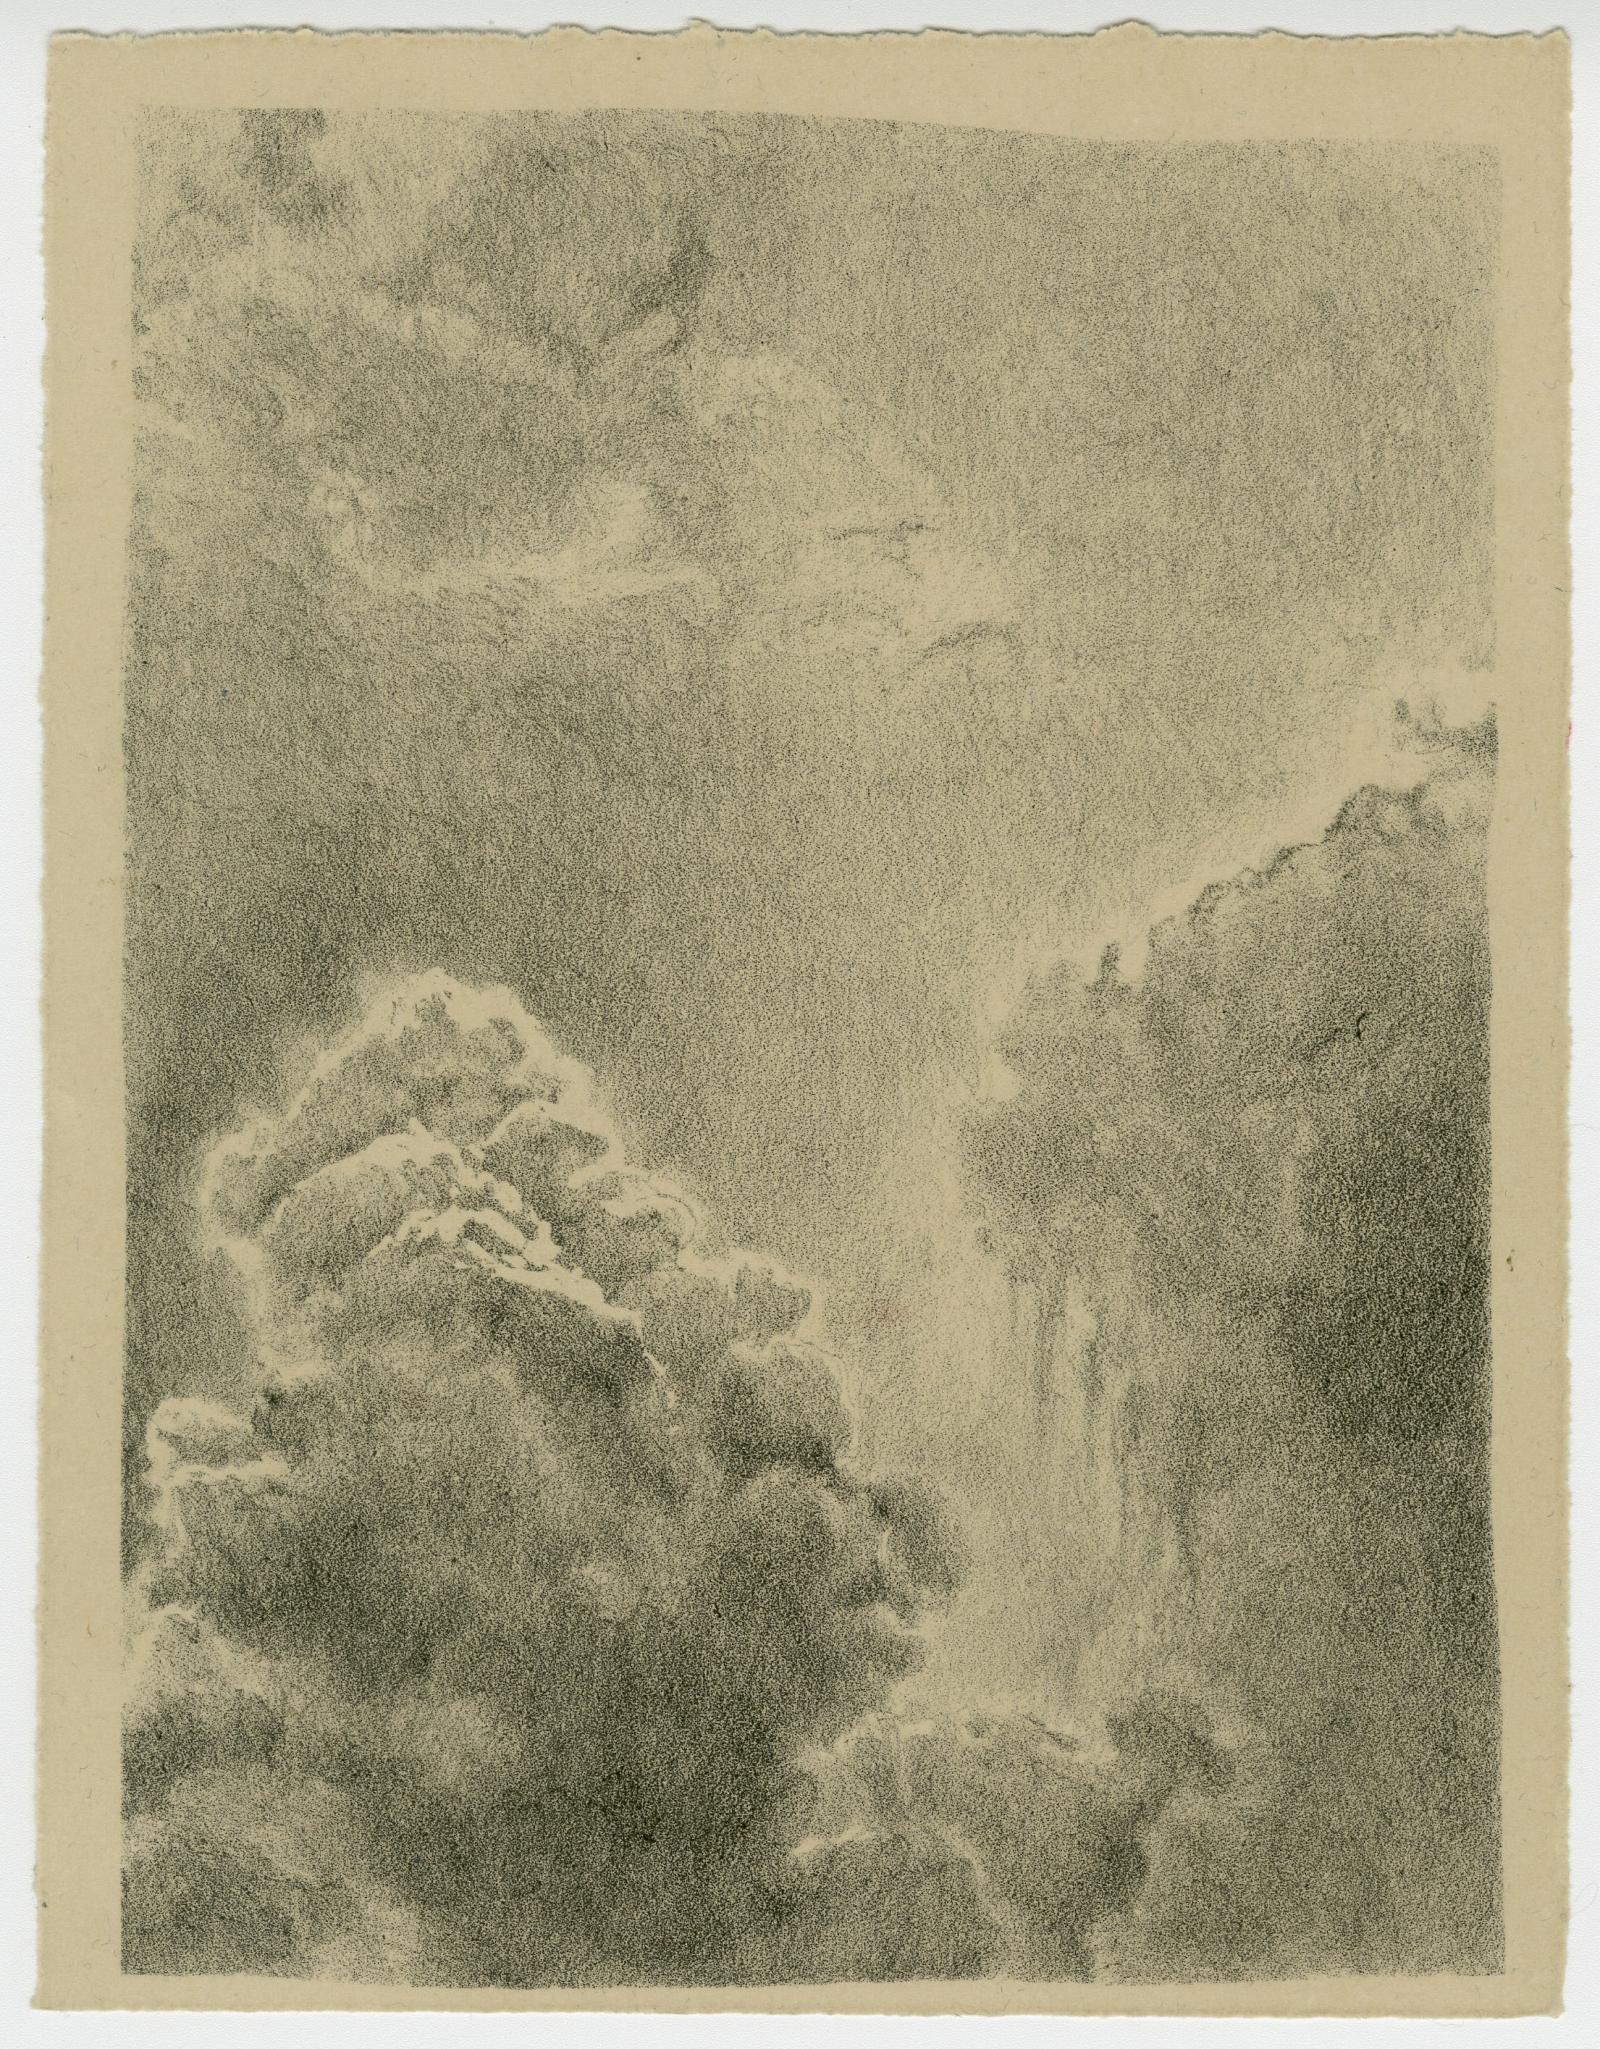 Lithograph of Stormlcouds